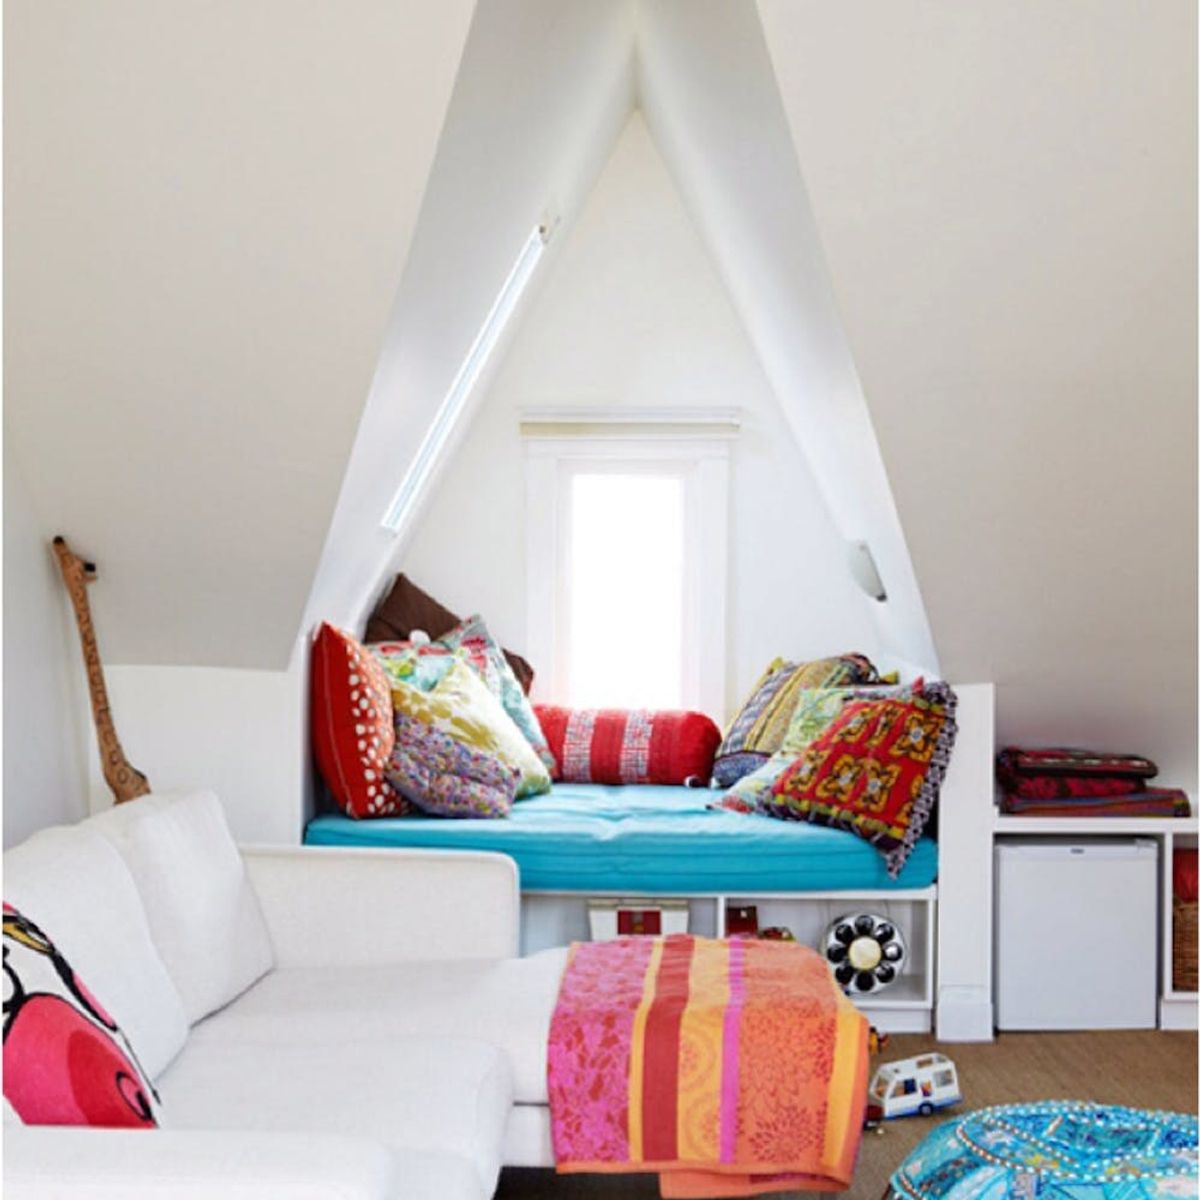 12 Inspiring Reading Nooks That Are Cozy AF